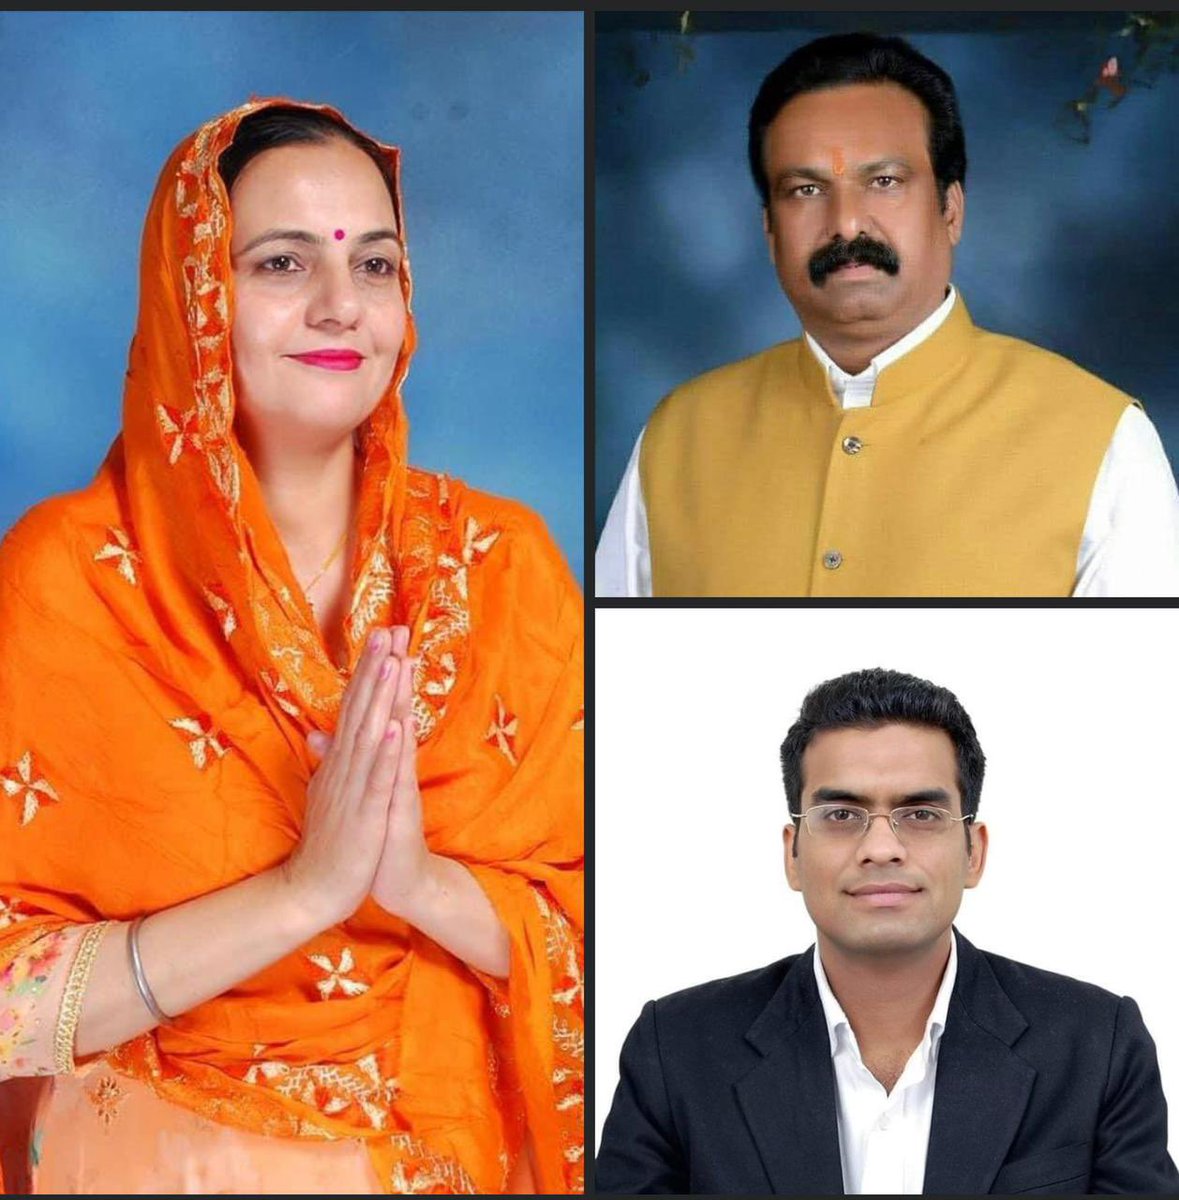 Congratulations to Smt Sarabjeet Kaur, Sri Dilip Sharma, Sri Anuj Guptha on being elected as the Mayor, Senior Dy Mayor, Dy Mayor of keenly contested Chandigarh Municipal Council elections. Congratulations to all three. @BJP4Chandigarh